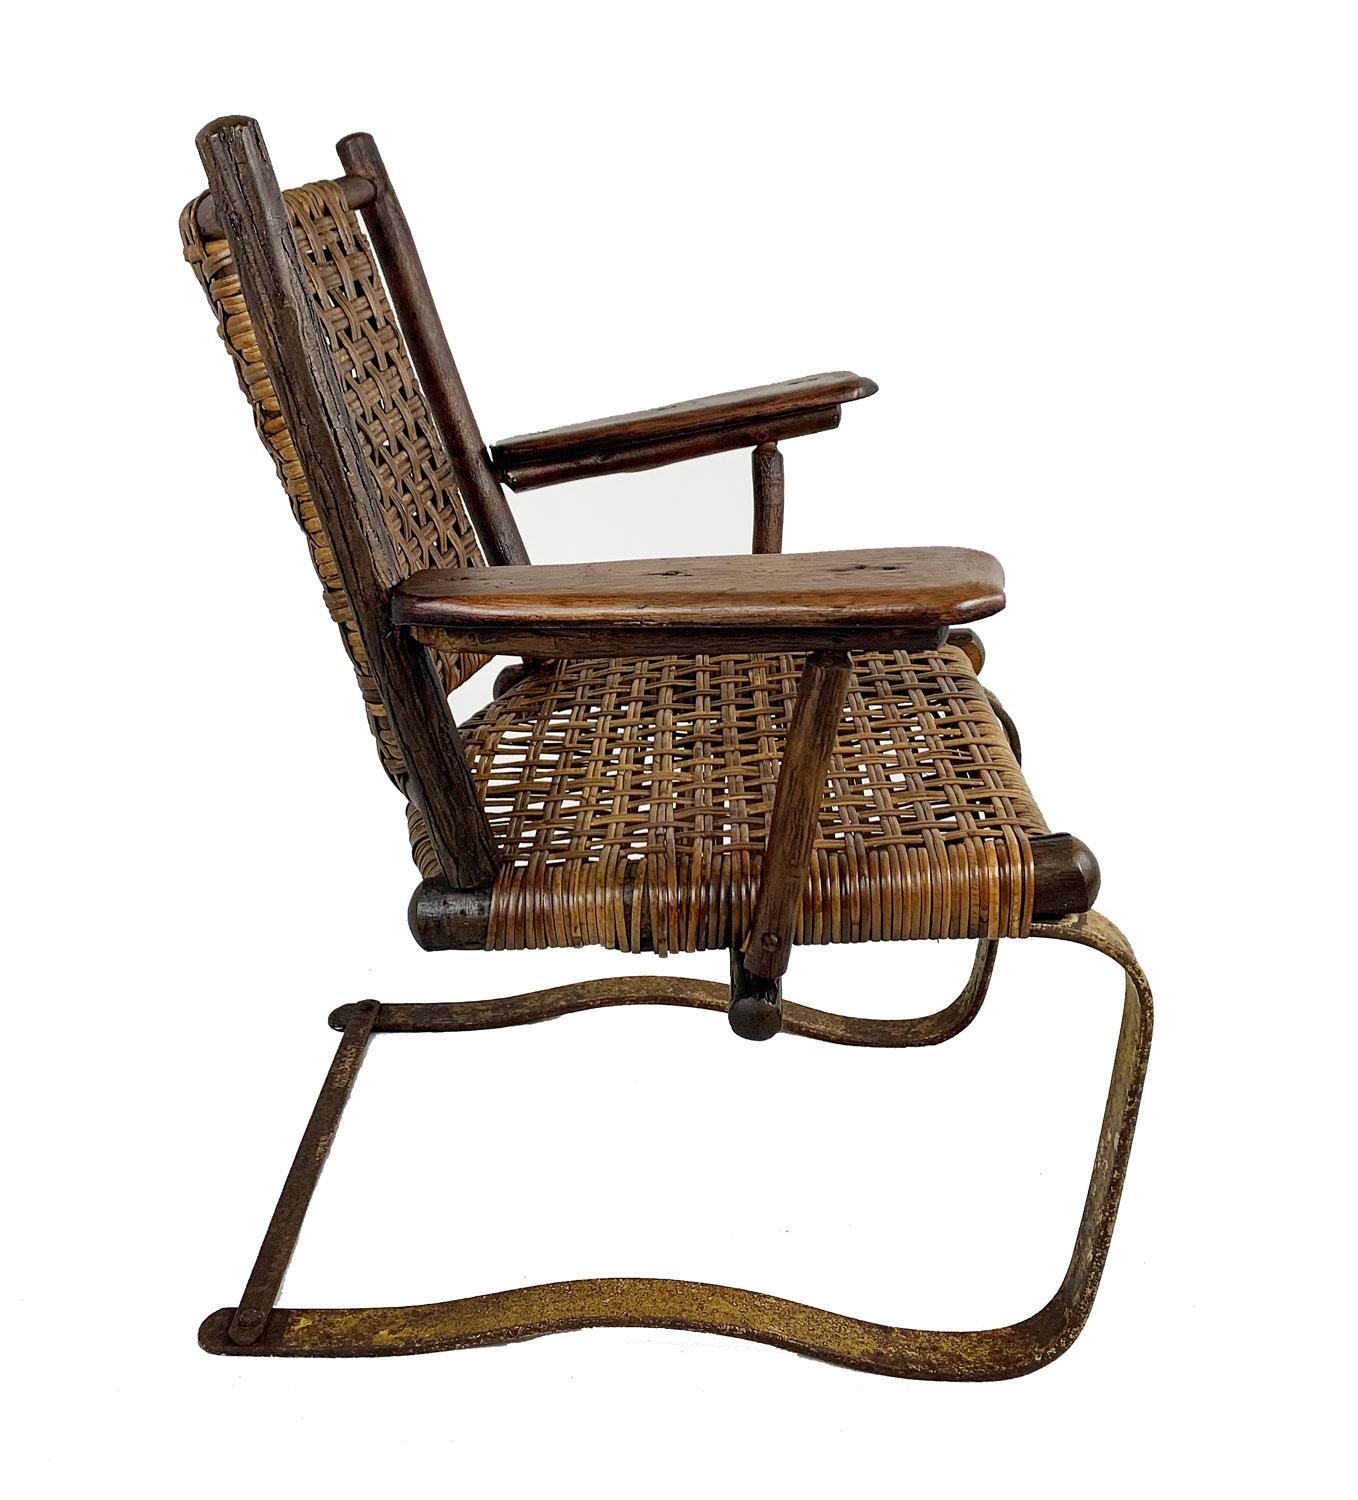 Old Hickory spring chair with a metal base and woven seat and back. The seat was rewoven at some point with narrower cane. It has a wide seat, rounded back, wide arm rests, and bounces on its metal frame, so it is sort of like sitting in a rocking